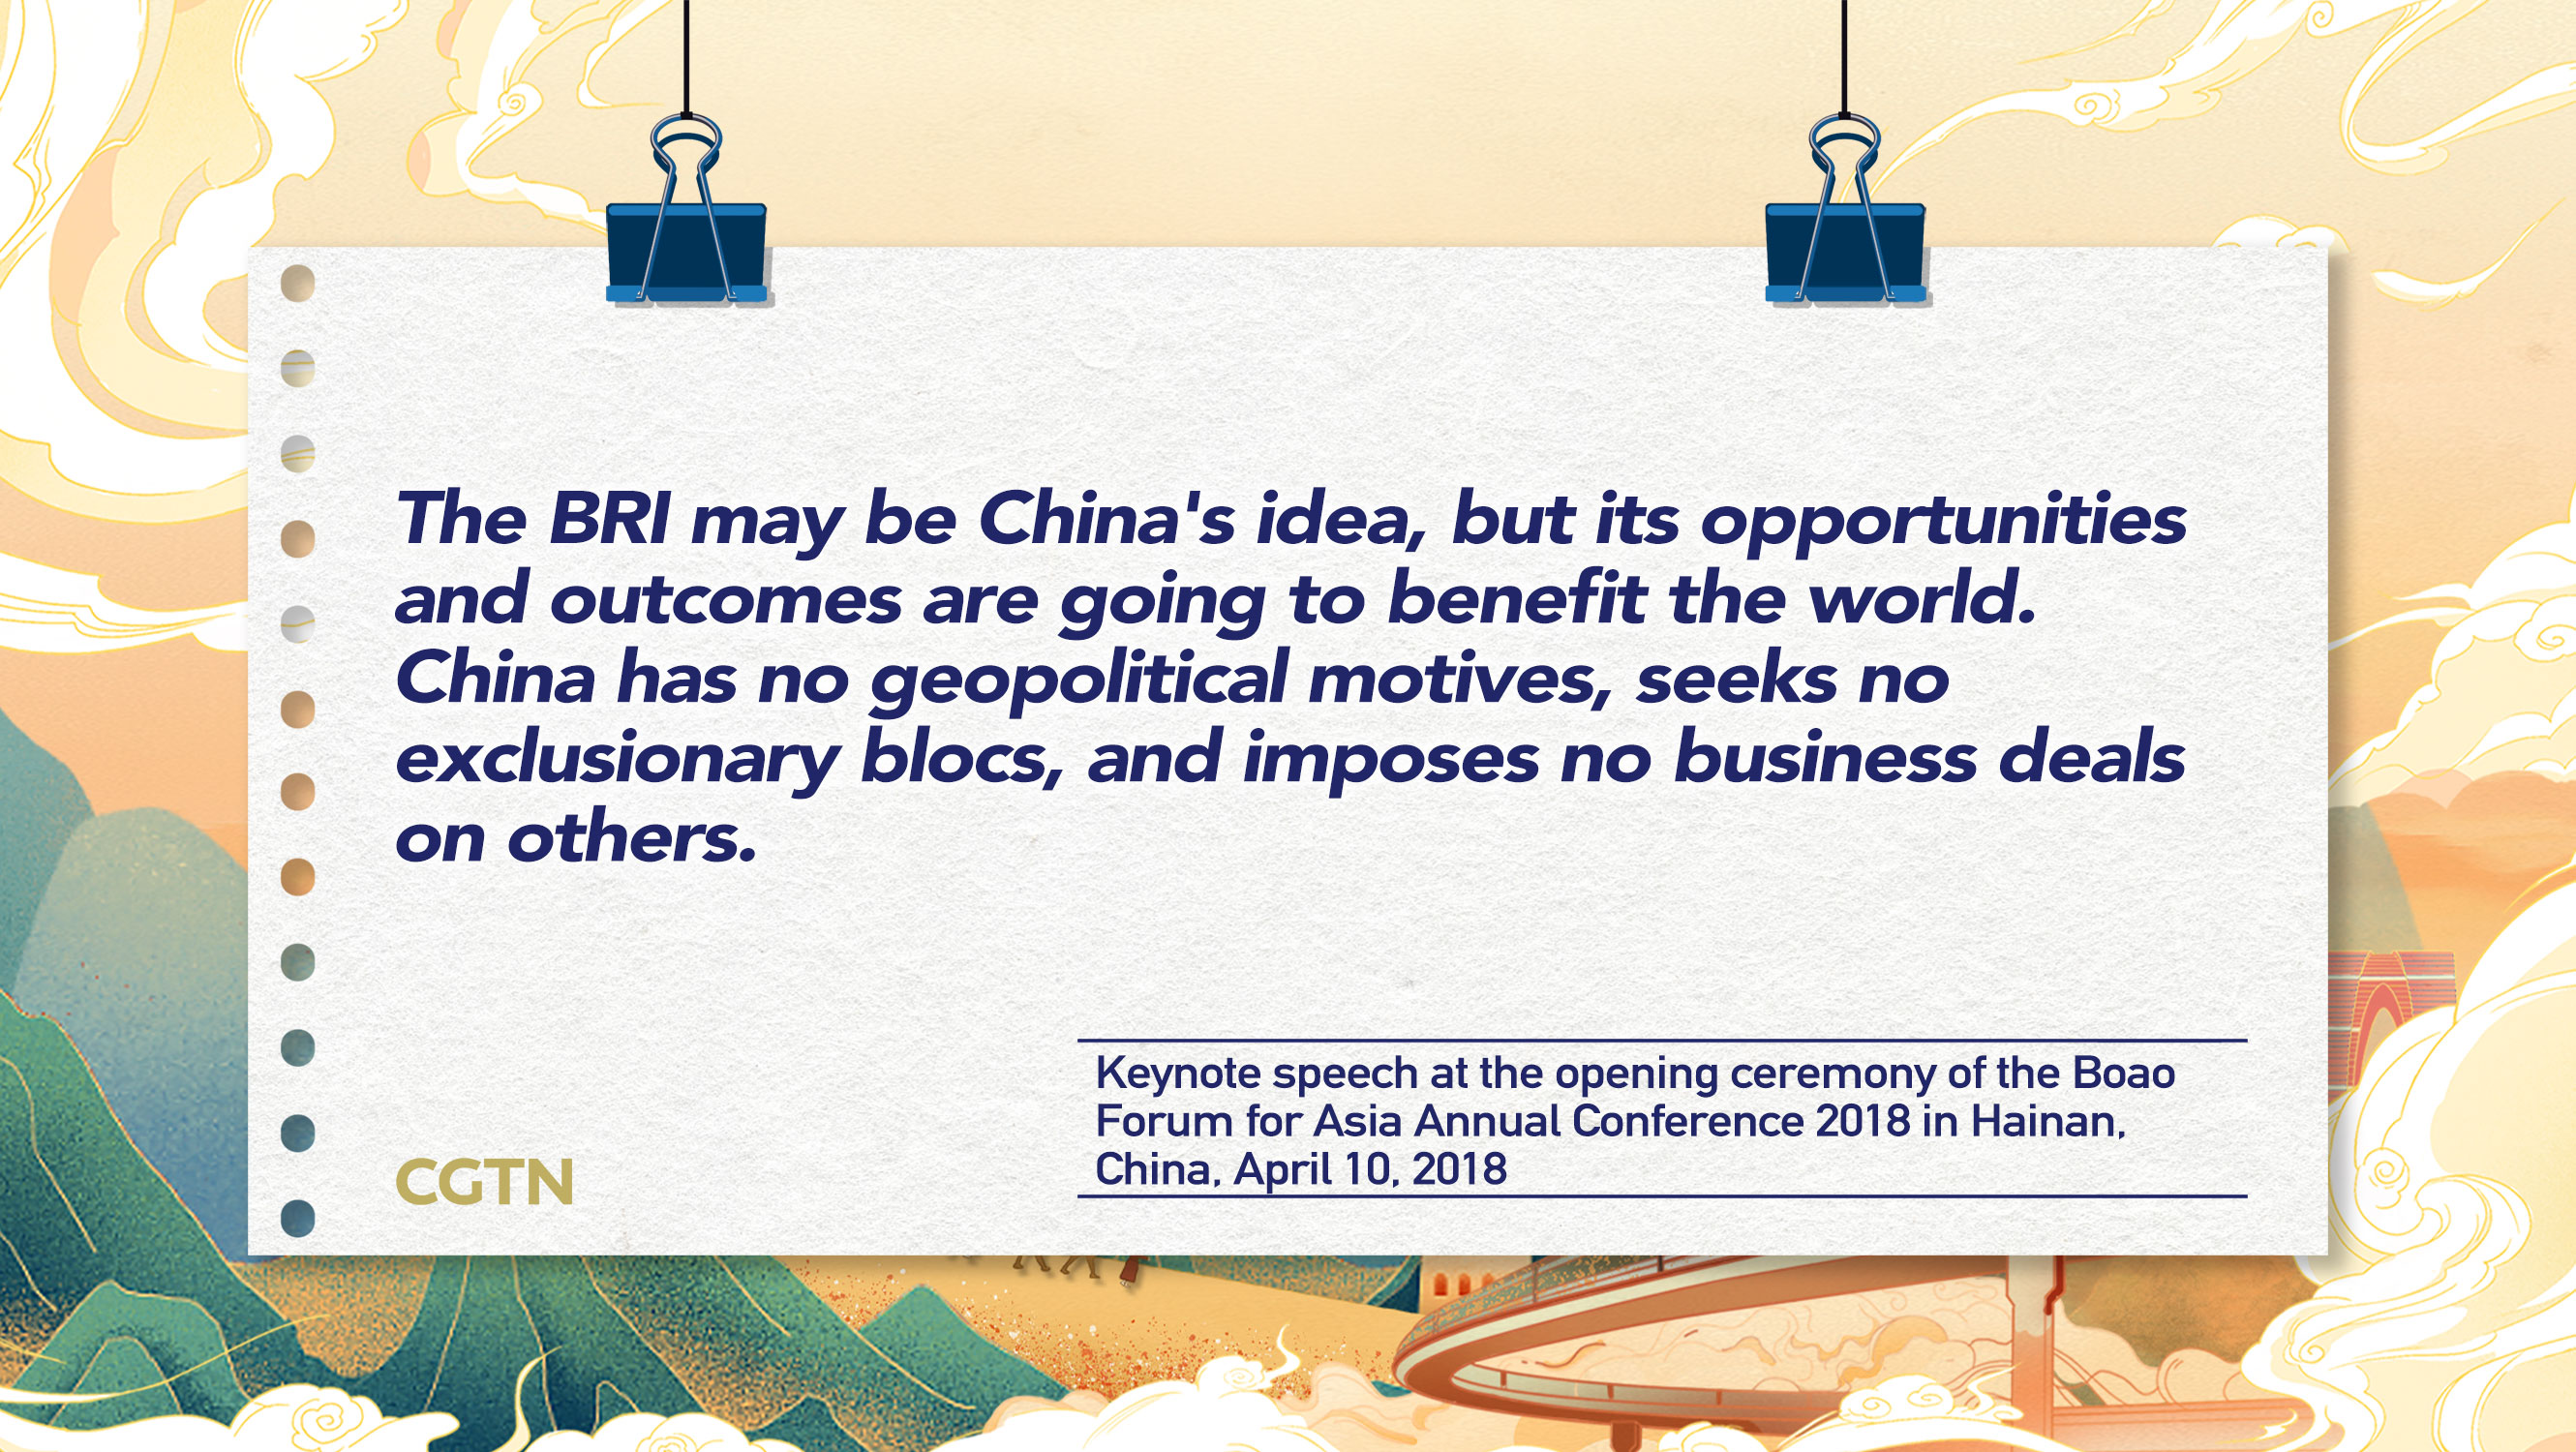 Xi Jinping's key quotes on Belt and Road Initiative